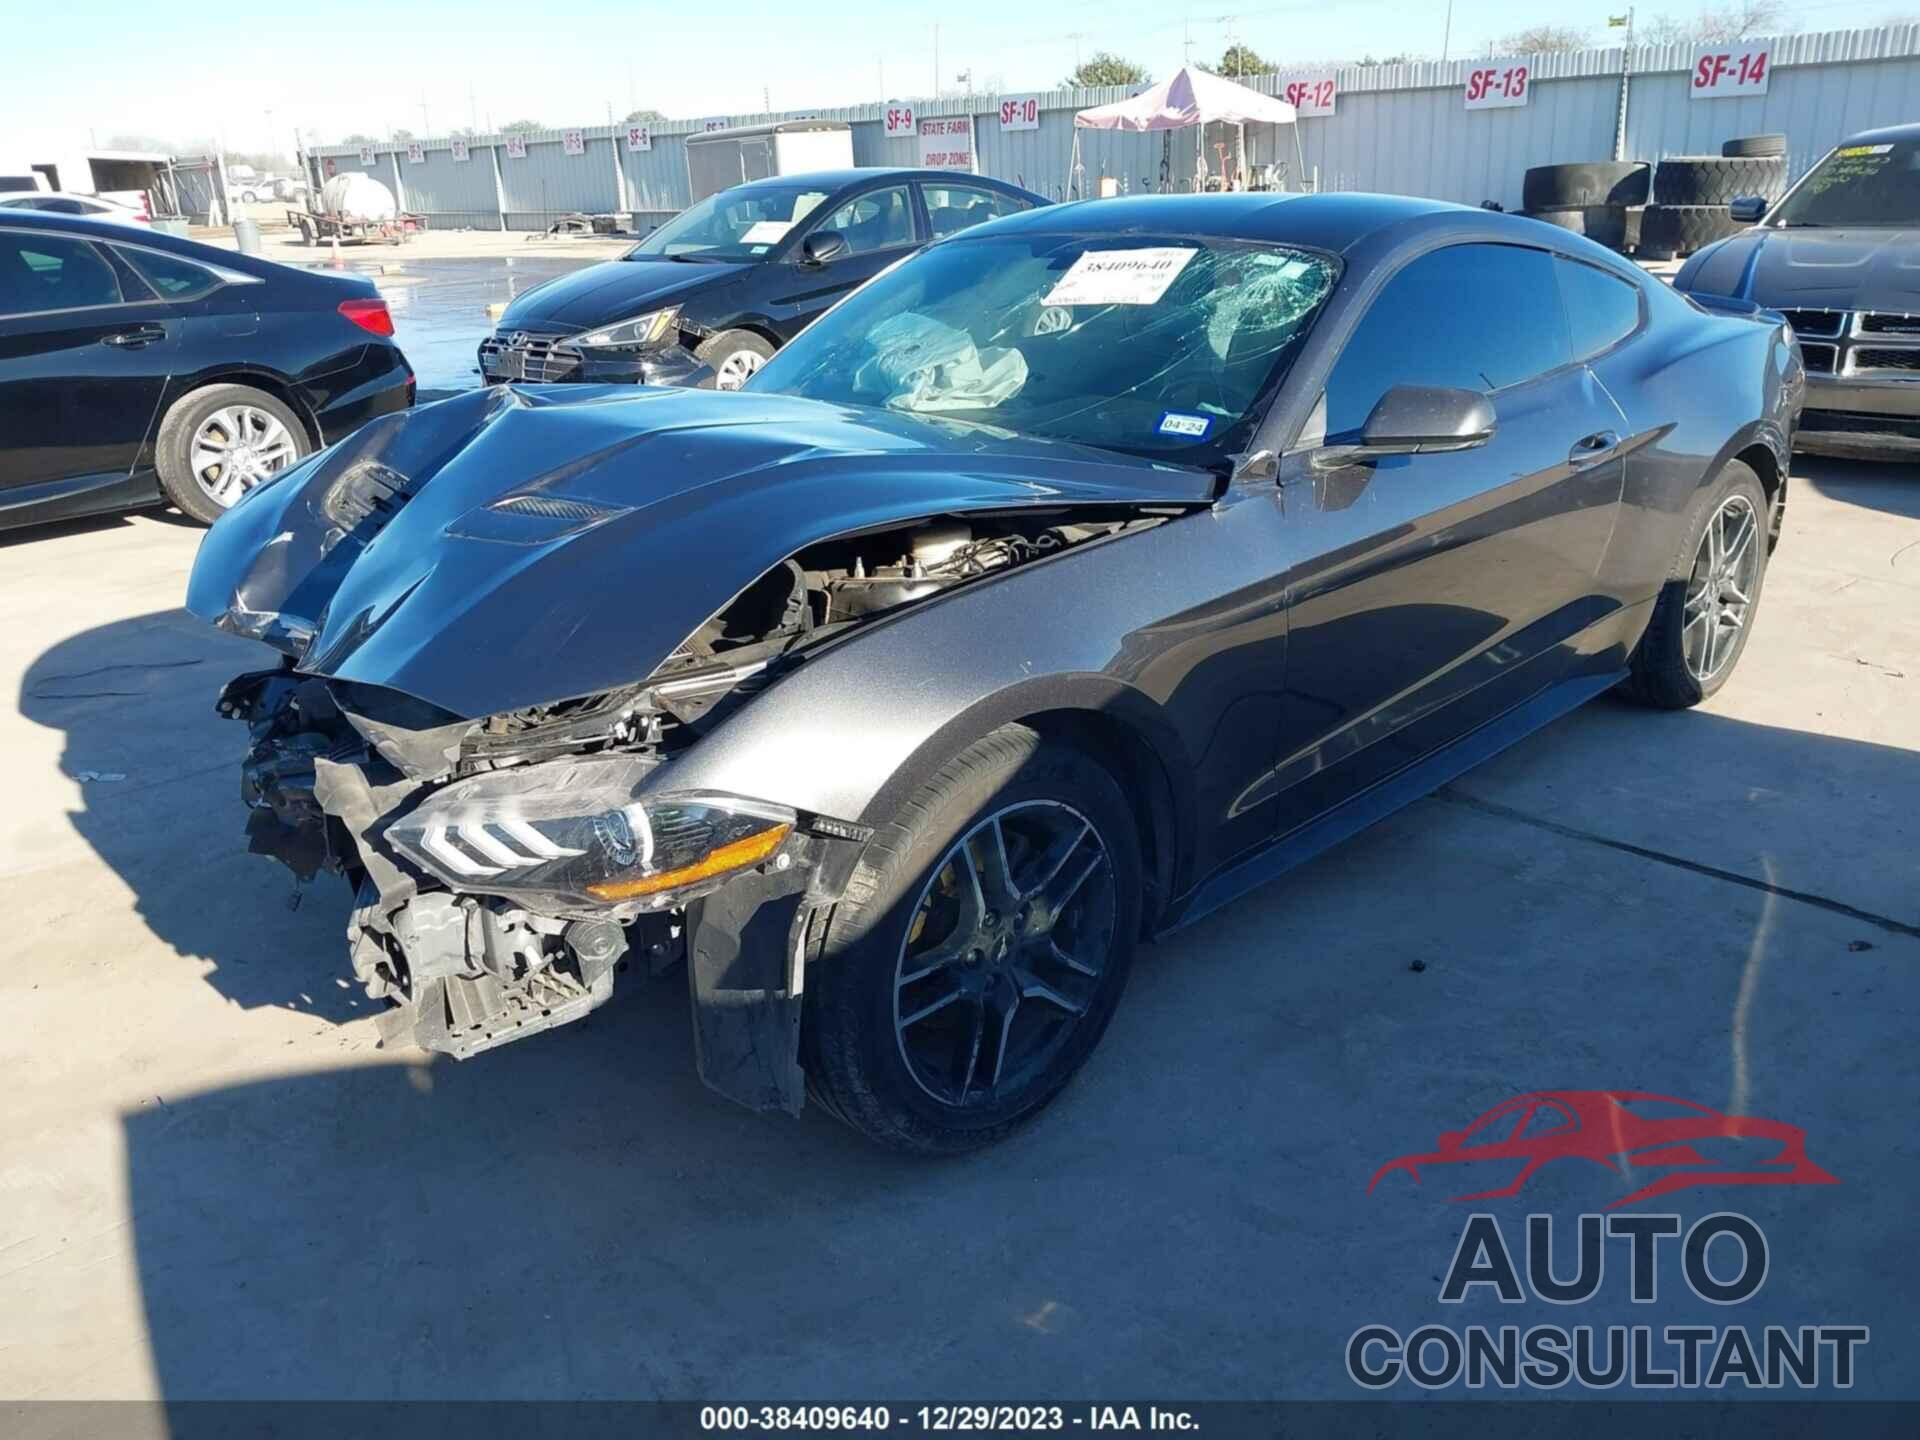 FORD MUSTANG 2018 - 1FA6P8TH7J5122399